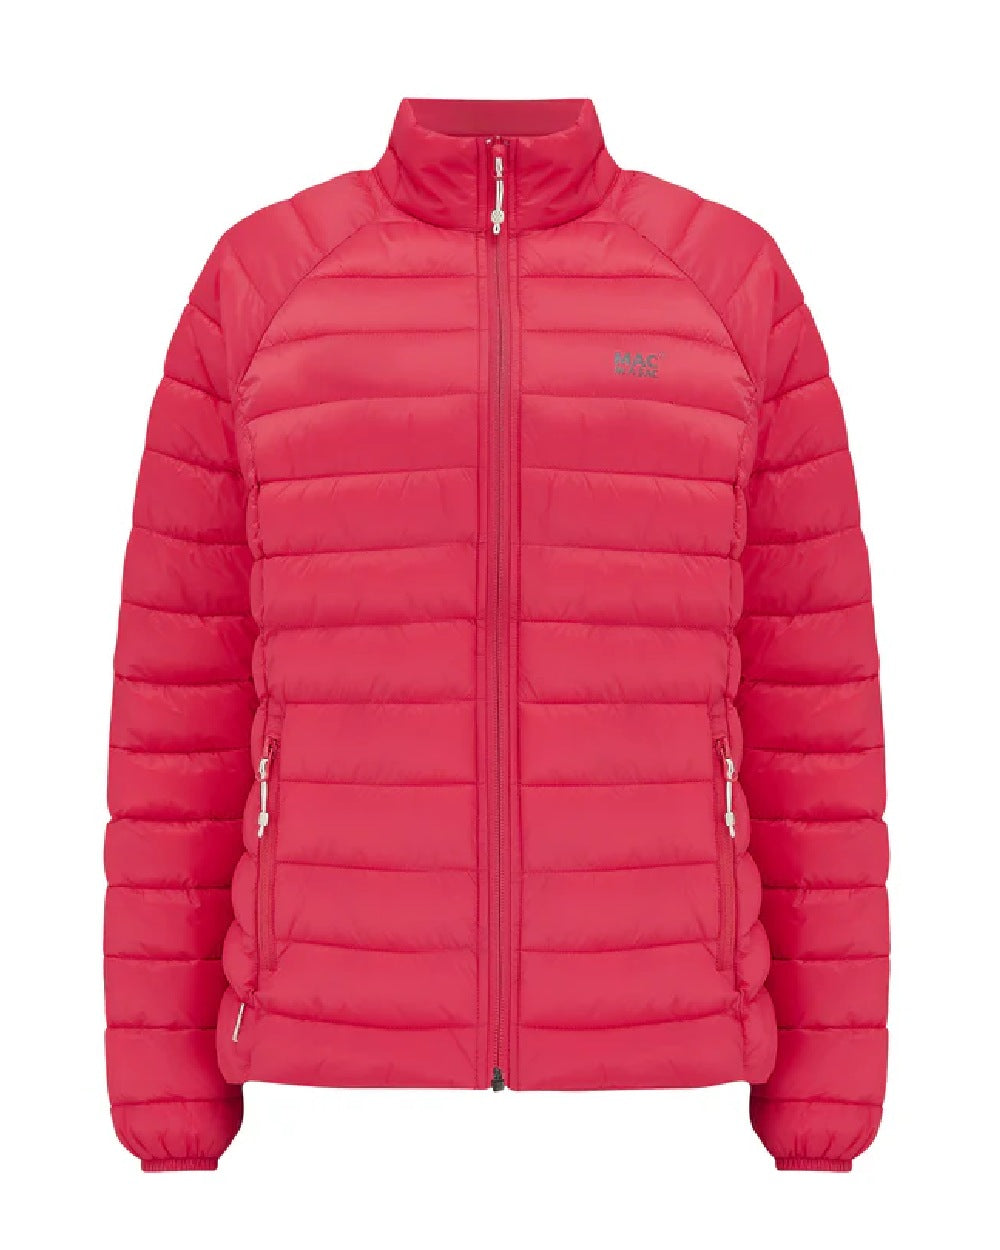 Watermelon coloured Mac In A Sac Womens Synergy Jacket on white background 